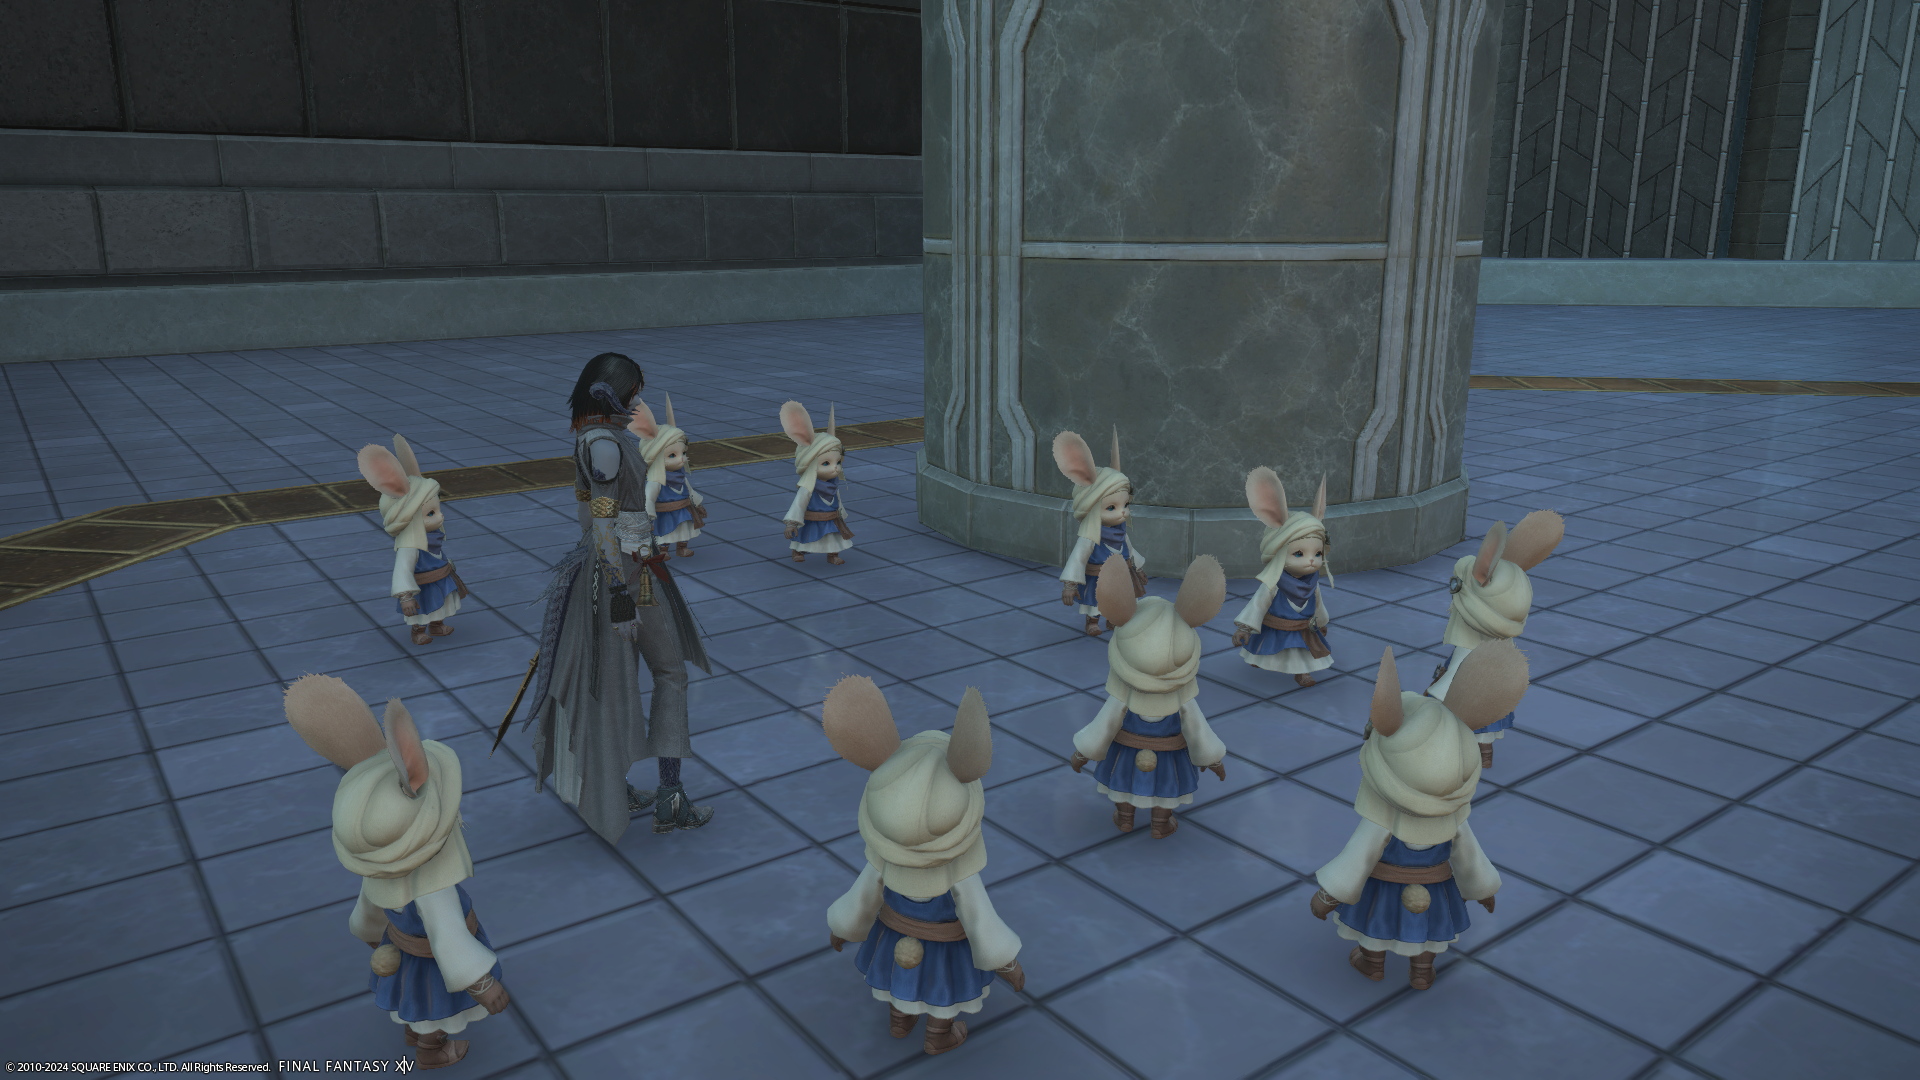 A circle of Loporrits standing around a character.